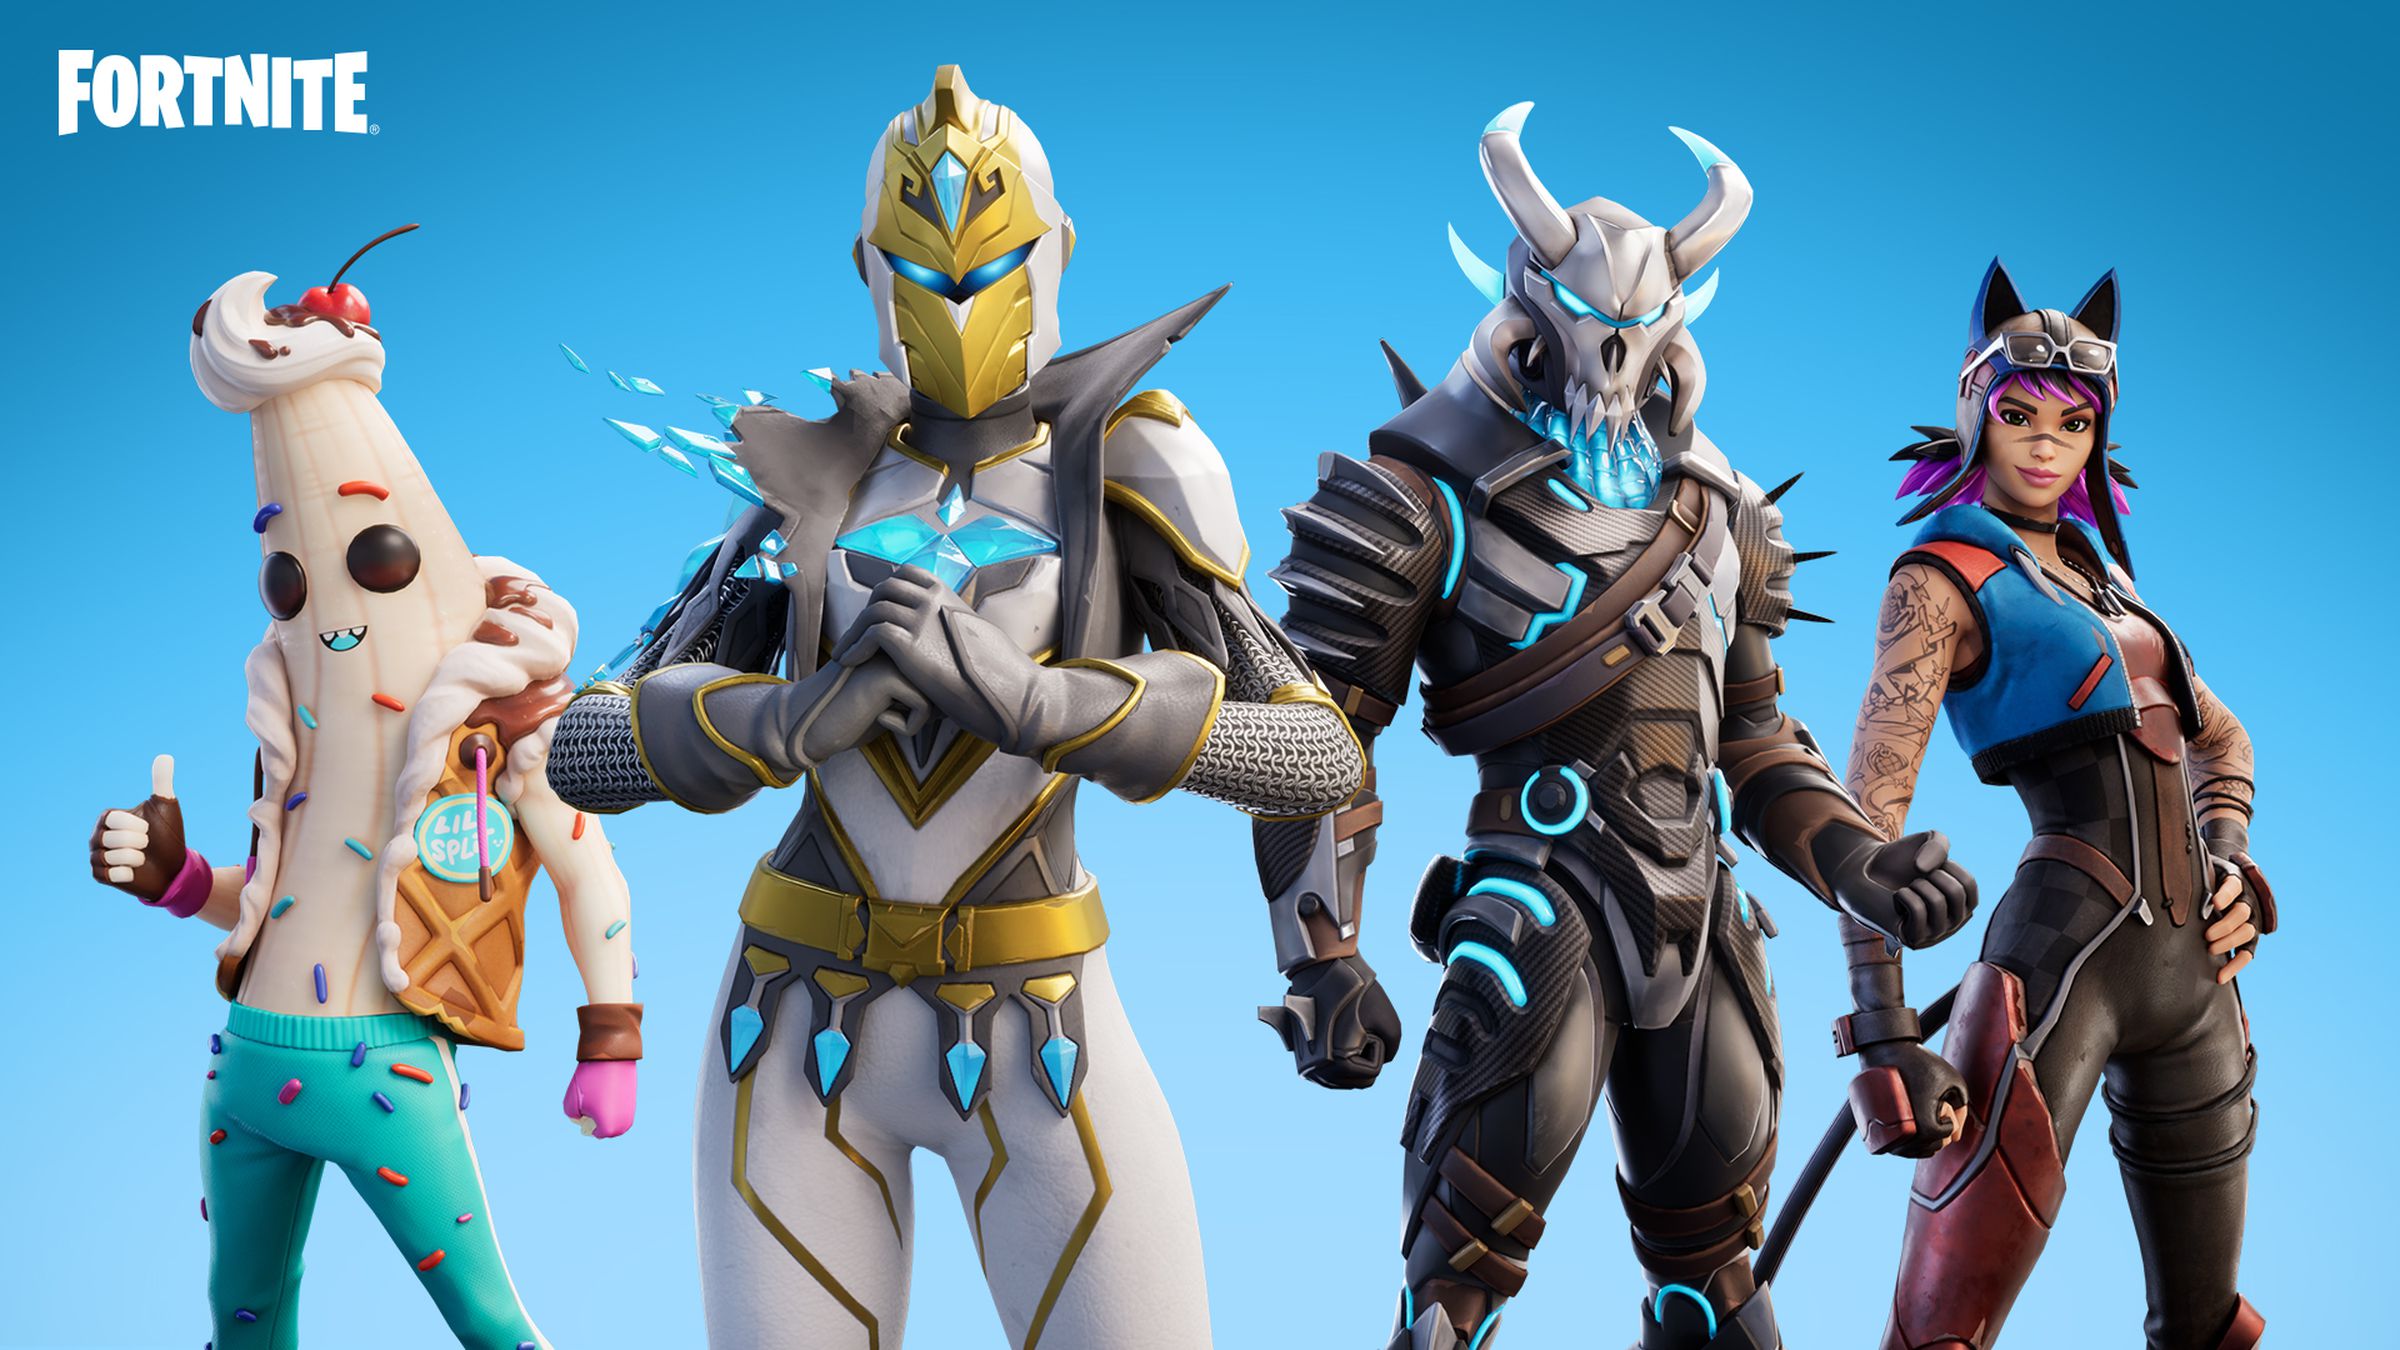 Art featuring four Fortnite characters.